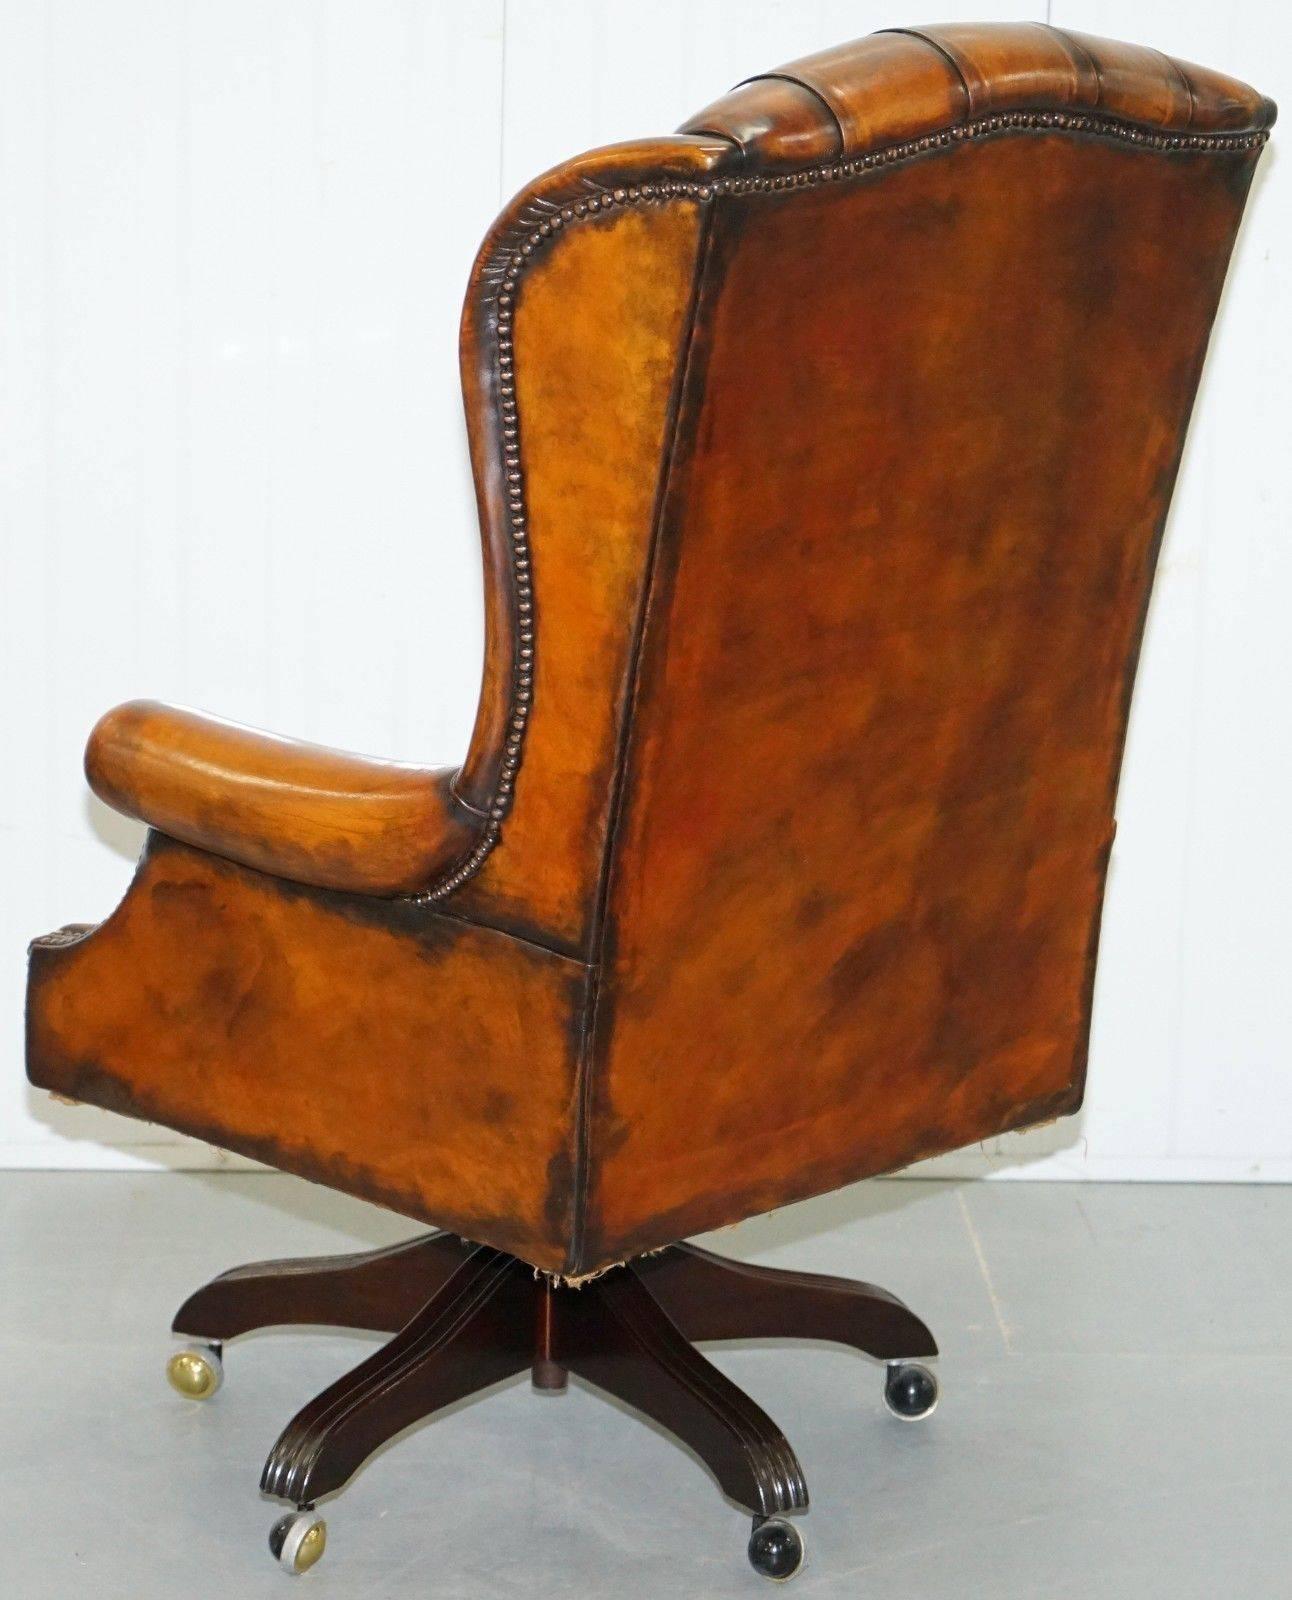 Hand-Carved 1 of 2 of Matching Chesterfield Wingback Office Chairs Hand-Dyed Brown Leather